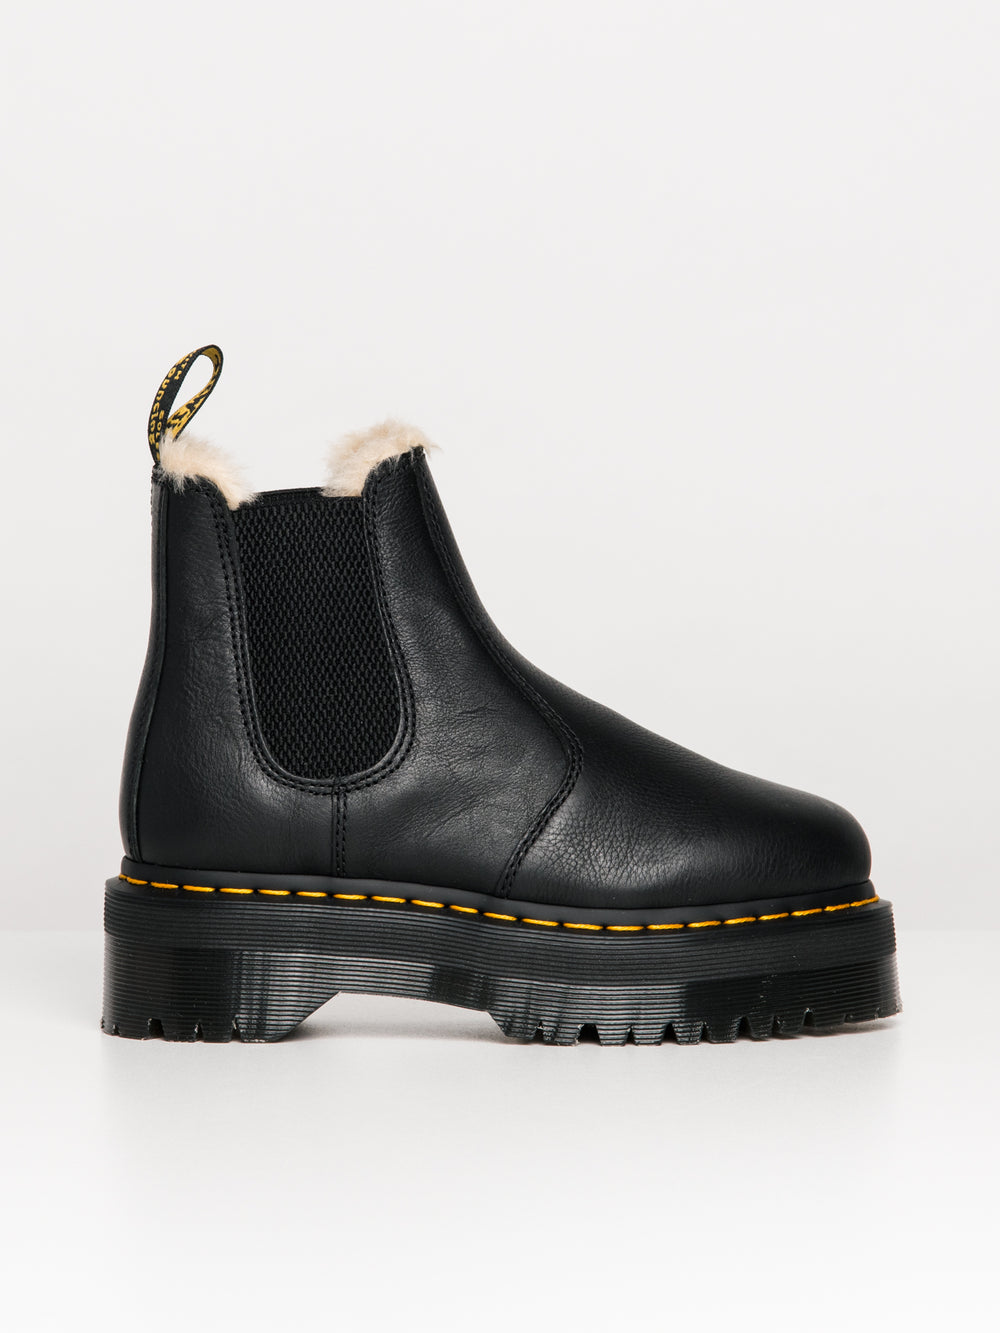 WOMENS DR MARTENS 2976 QUAD FUR LINED BOOT - CLEARANCE